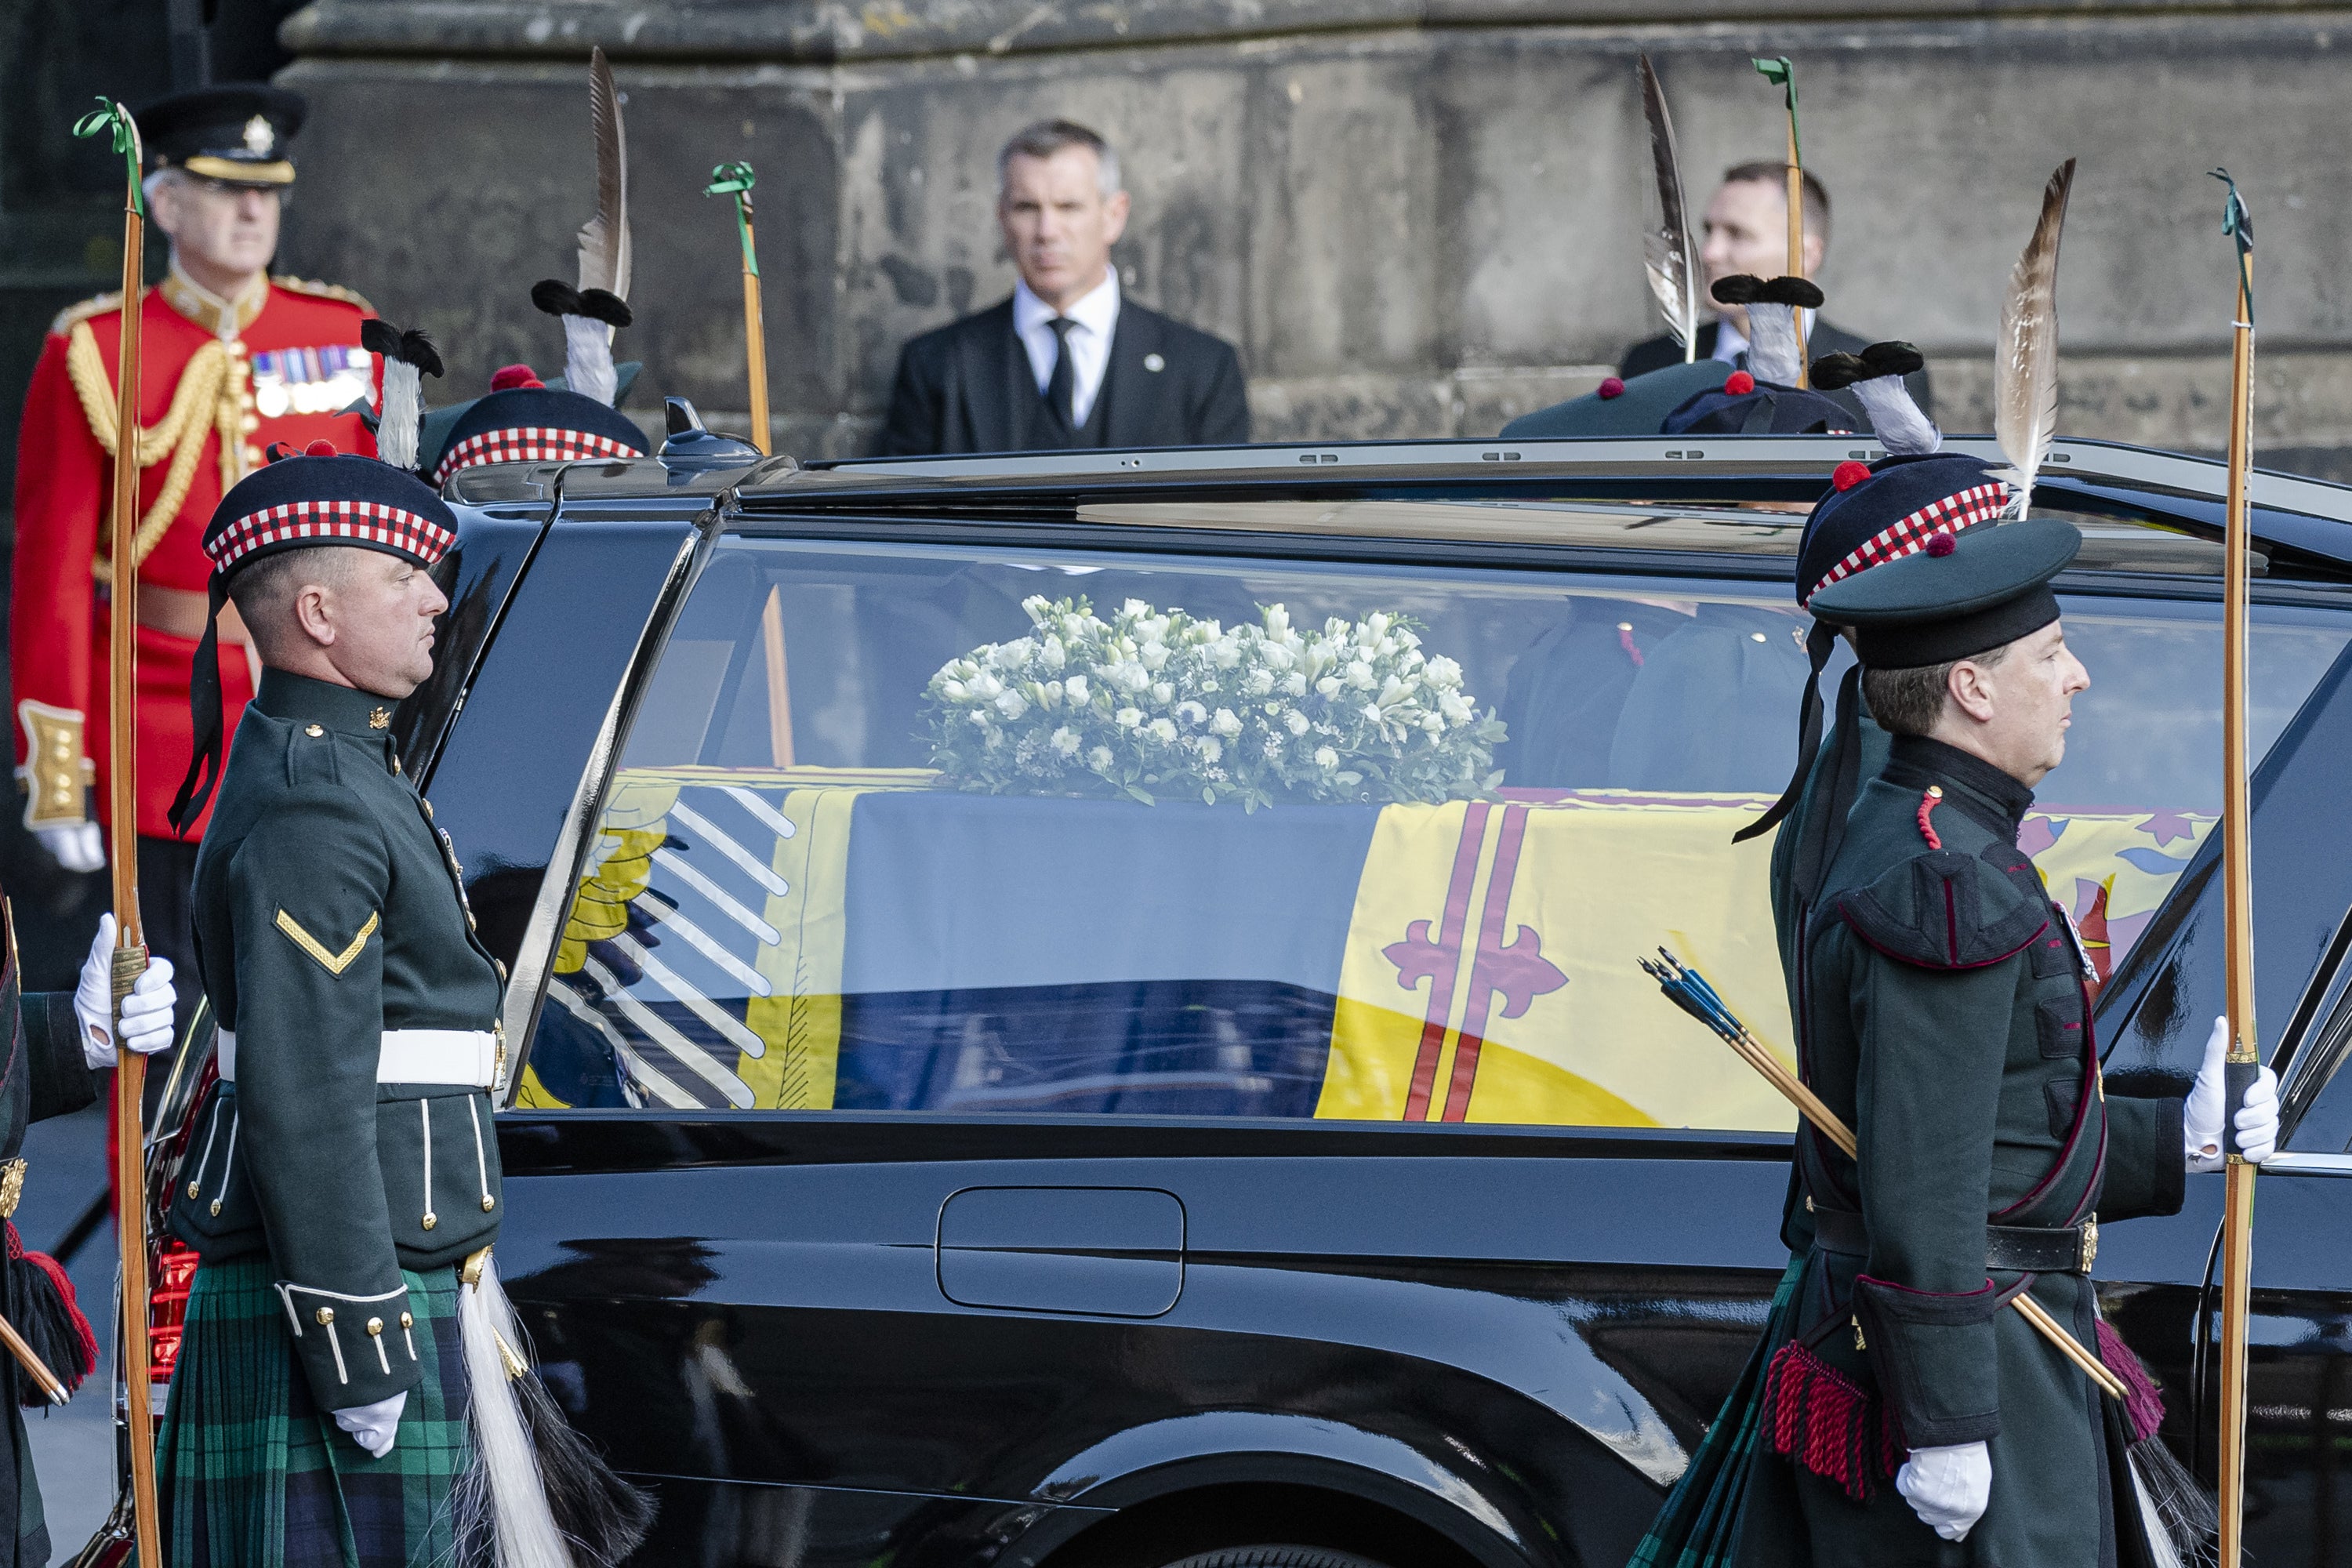 The hearse carrying Queen Elizabeth II’s coffin (Euan Cherry/Daily Mail/PA)